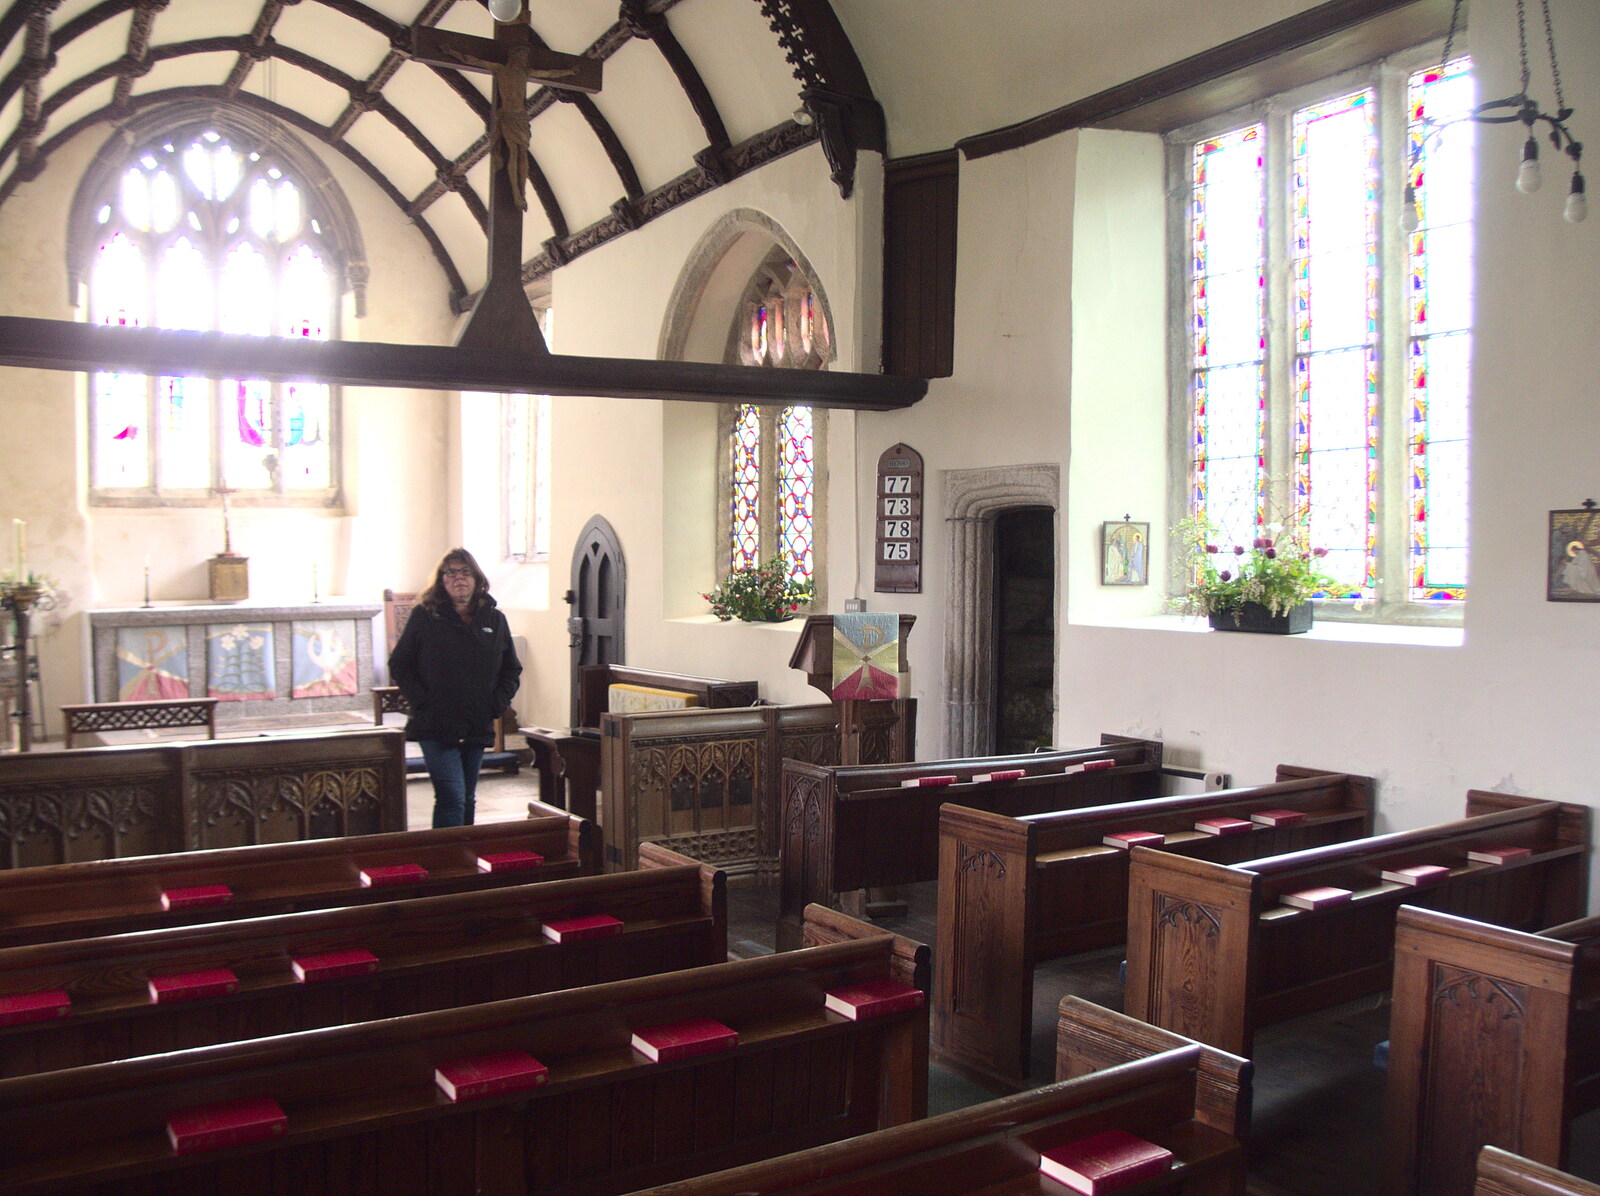 Sis roams around the nave of St. Mary's from Chilli Farms, Okehampton and the Oxenham Arms, South Zeal, Devon - 10th April 2023